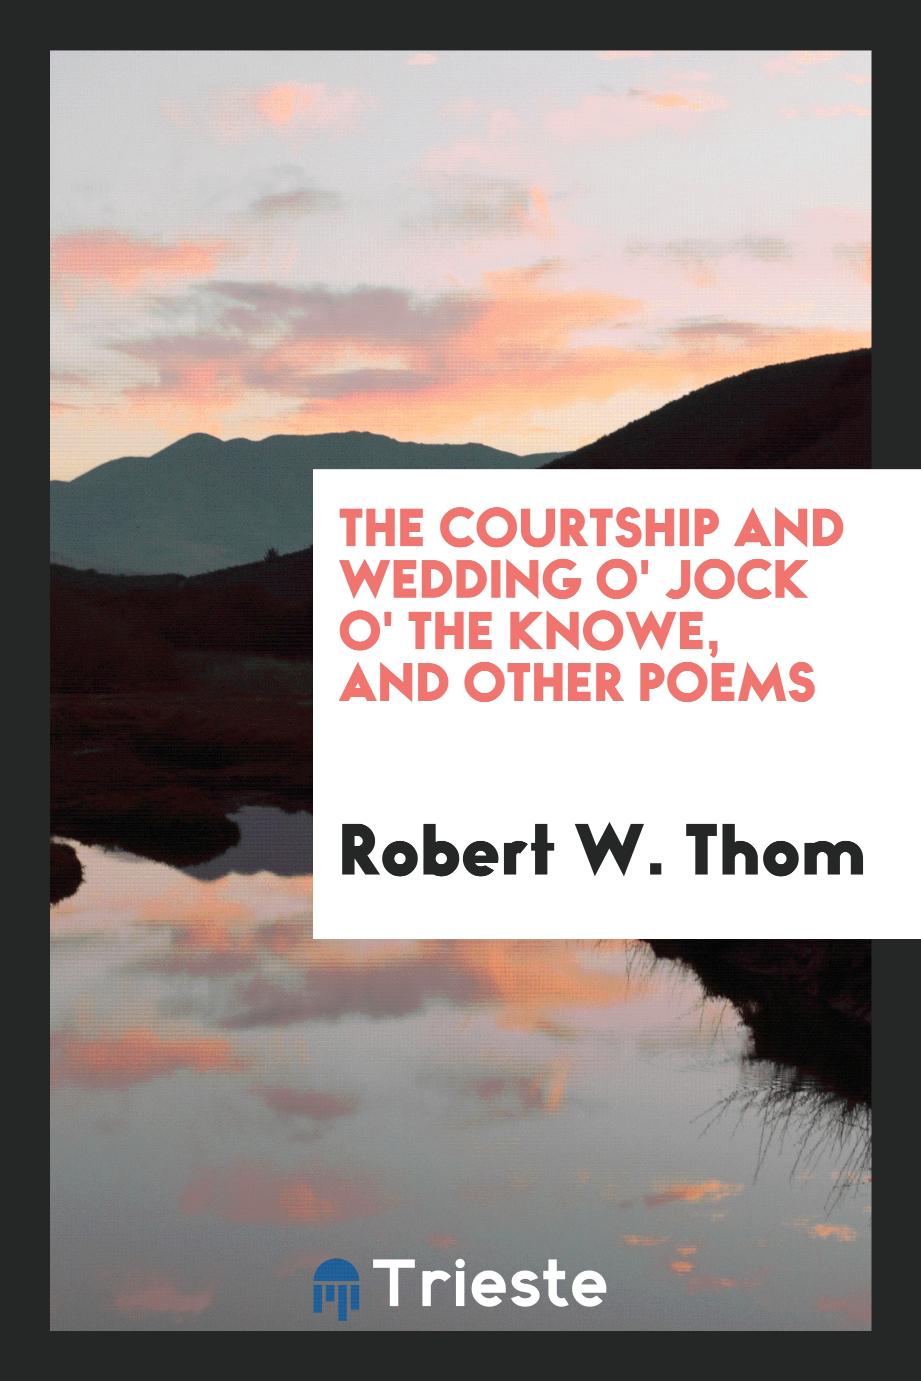 The Courtship and Wedding O' Jock O' the Knowe, and Other Poems